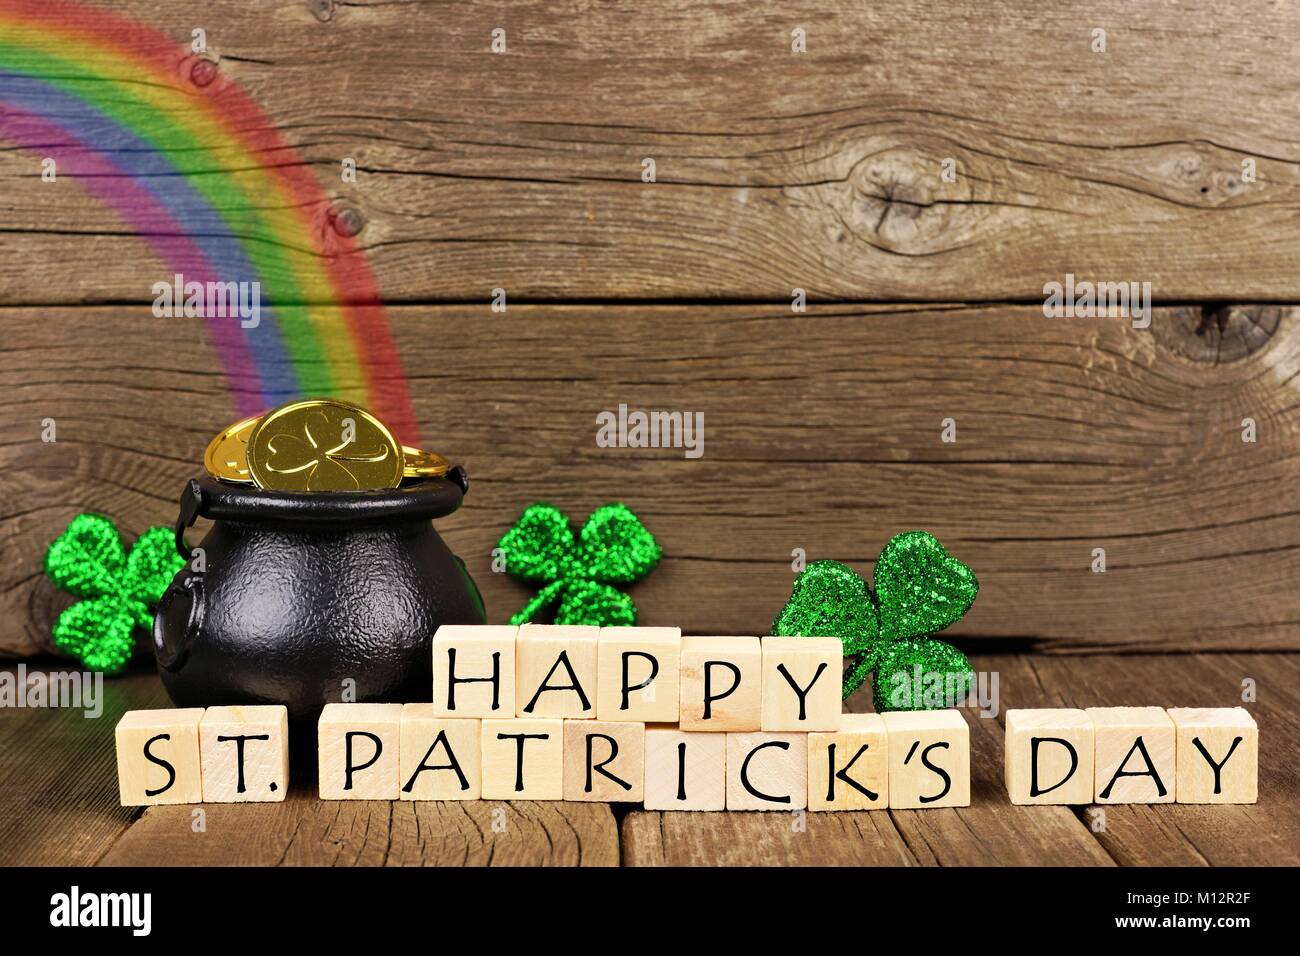 Happy St Patricks Day wooden blocks with Pot of Gold, rainbow and shamrocks against rustic wood Stock Photo